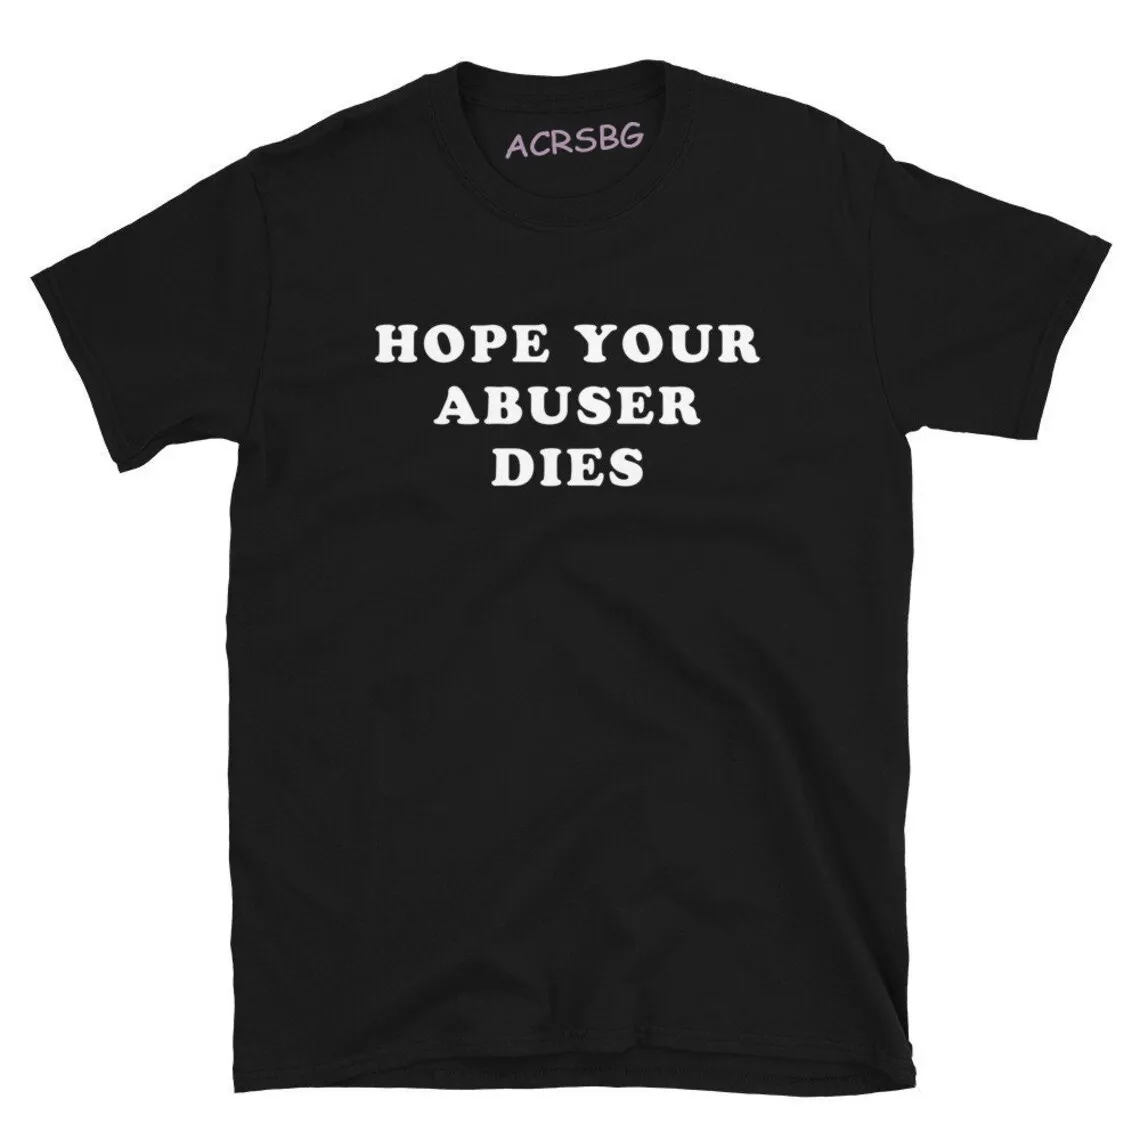 

Hope Your Abuser Dies Print T Shirts Unisex Round Neck Casual Plus Size Sweatshirts Summer Fall Streetwear Tops Shirts